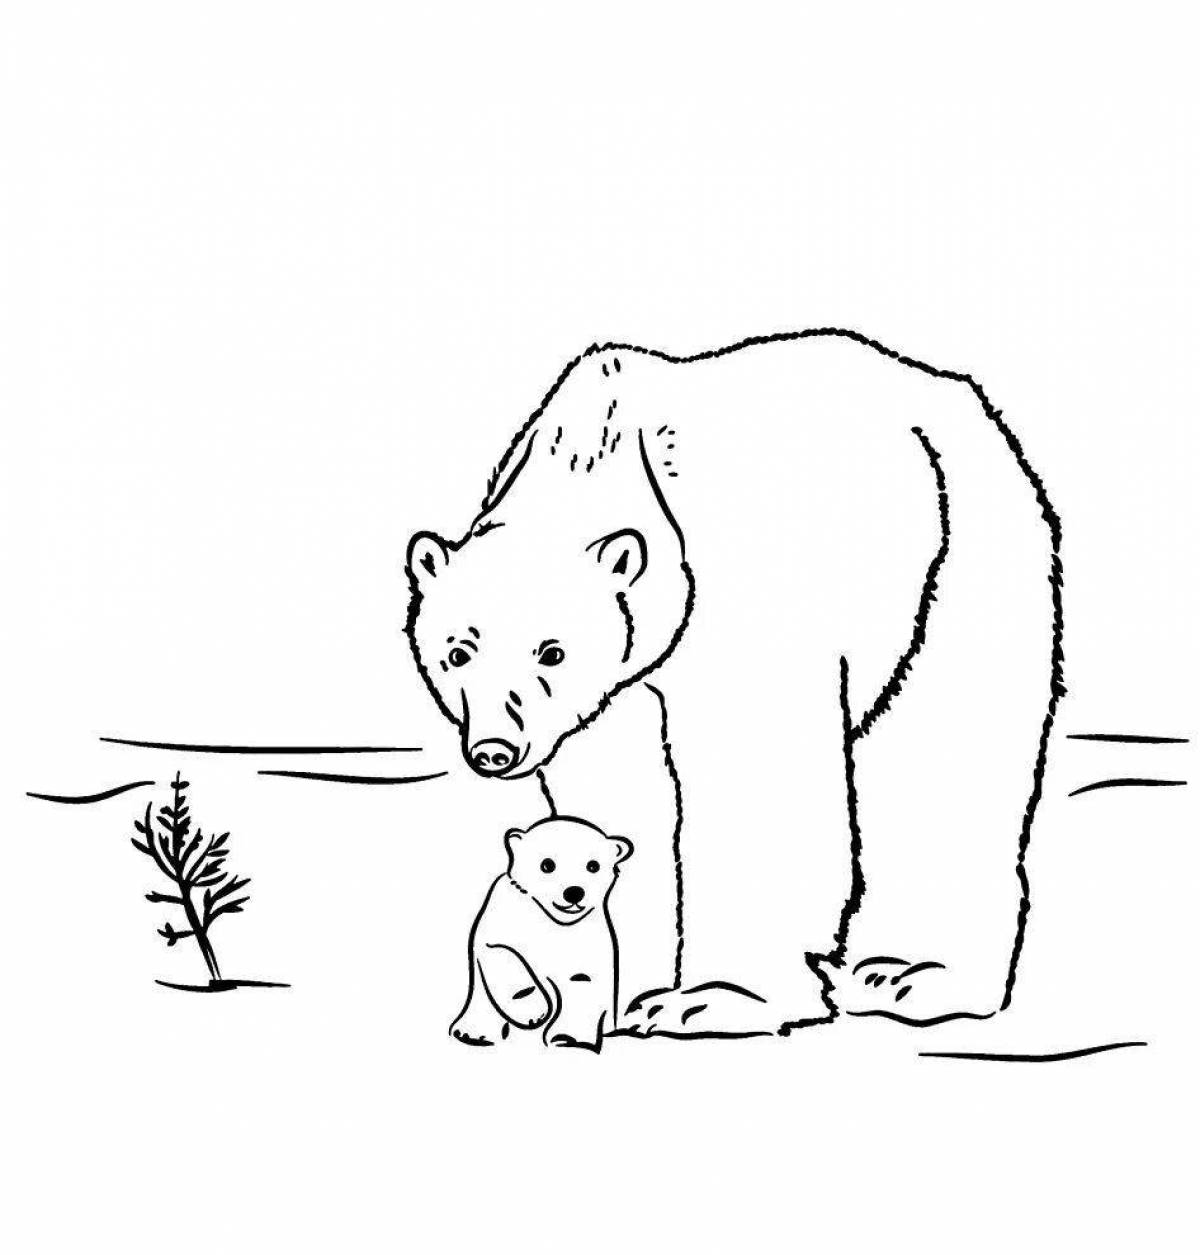 Coloring page happy teddy bear with cubs